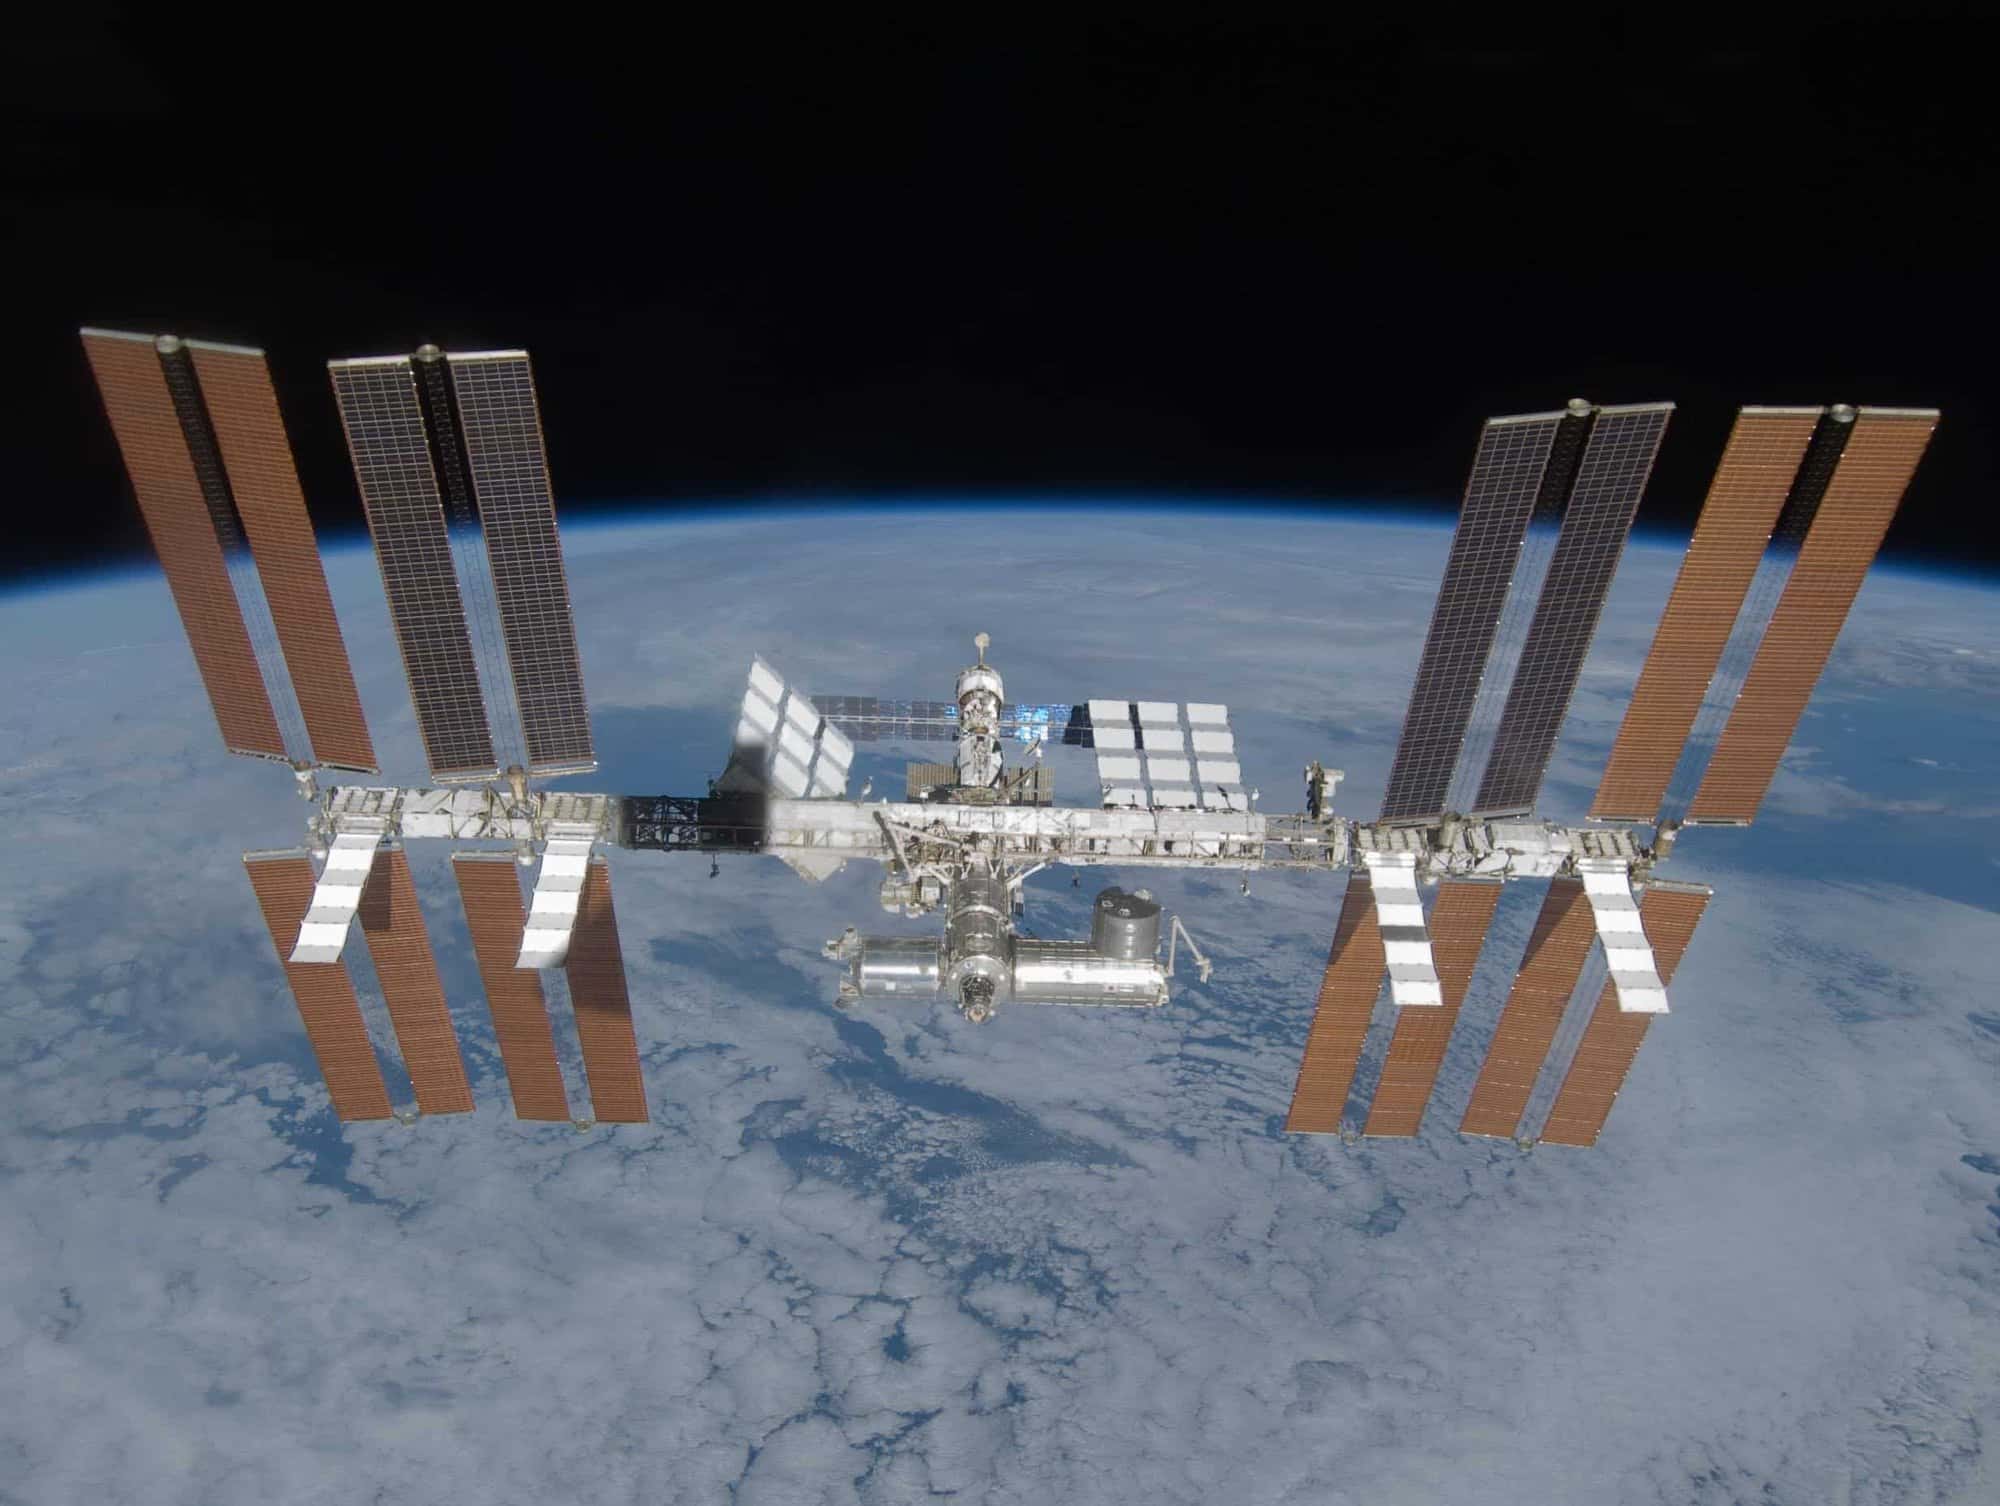 Understand why Brazil was kicked out of the International Space Station